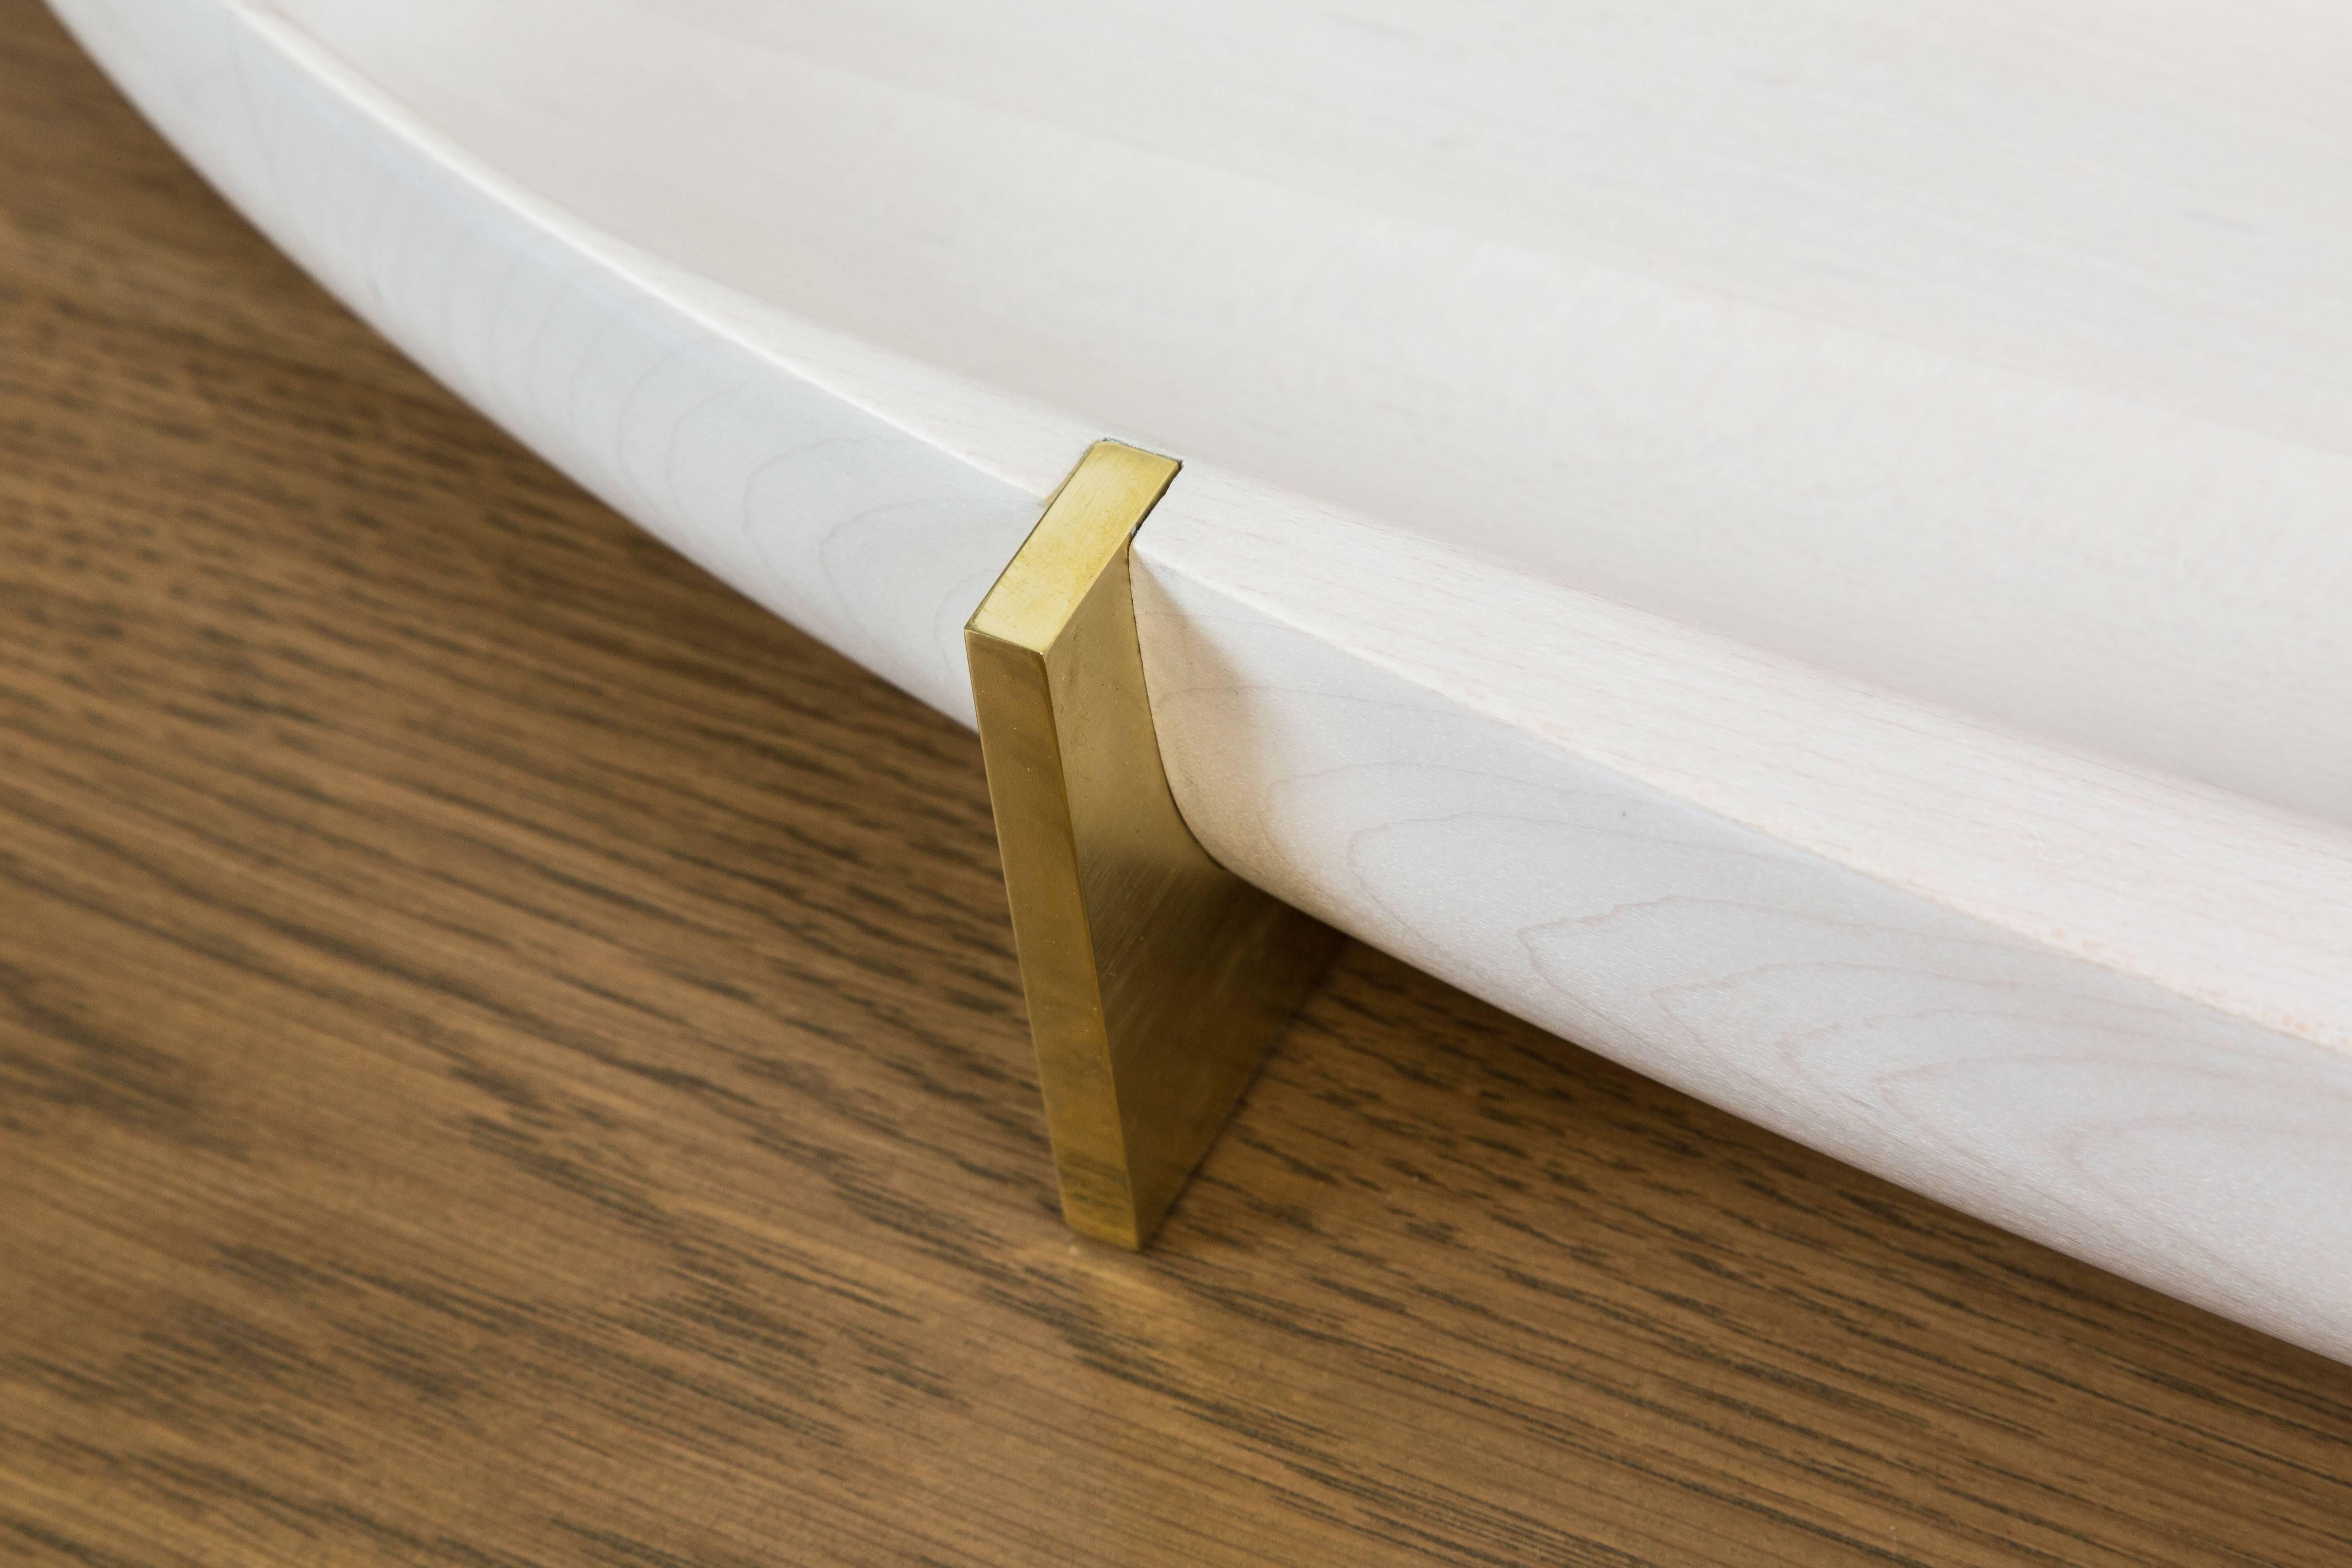 Bleached Maple and Brass Oval Tray by Vincent Pocsik for Lawson-Fenning 1